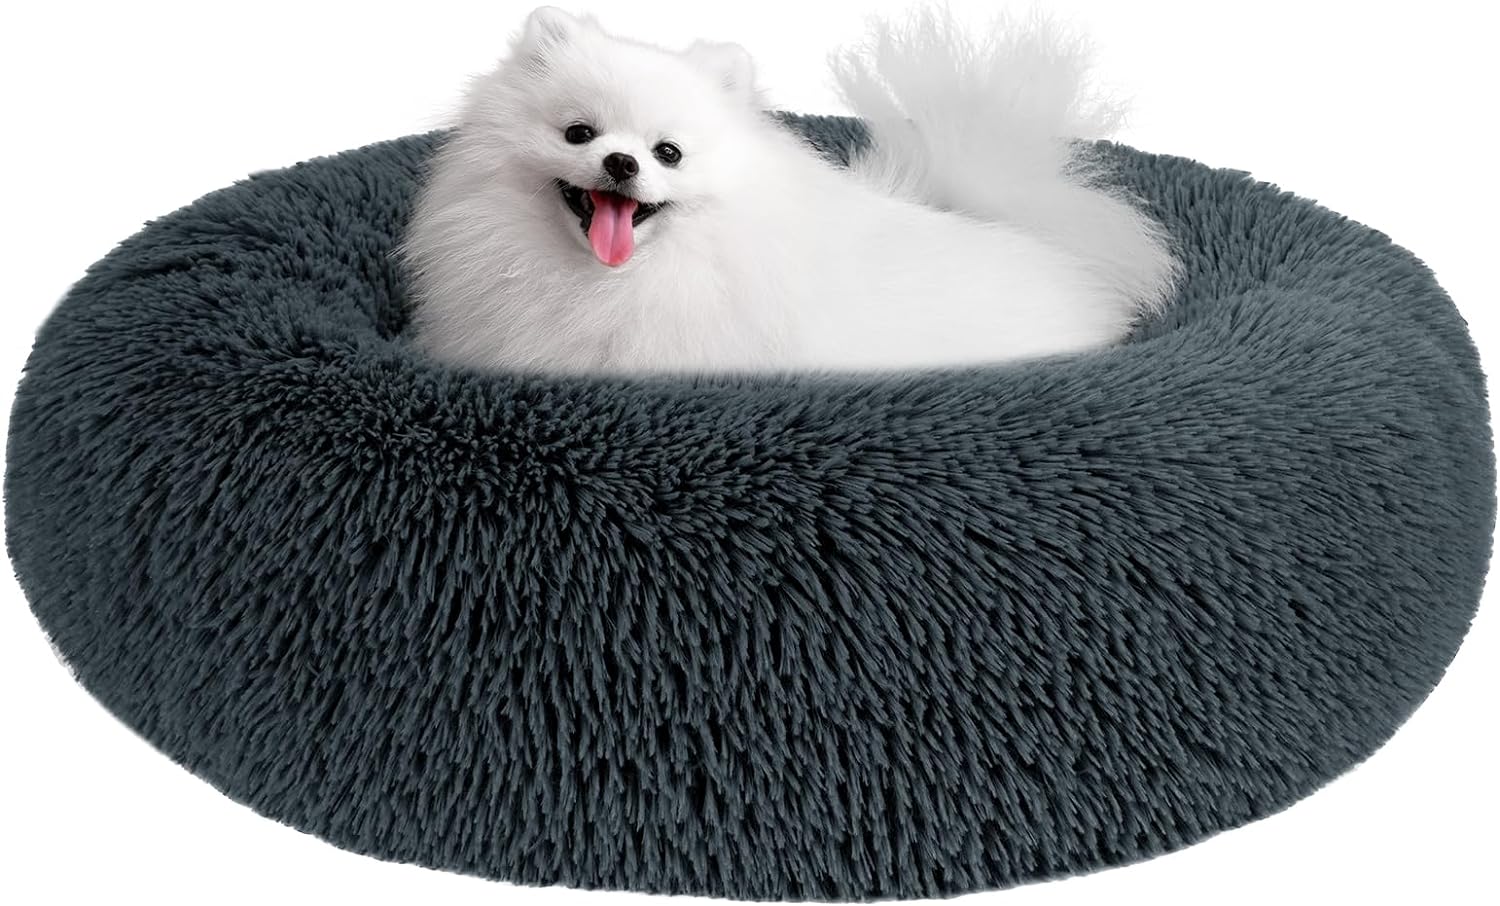 Small Dog Bed, Anti-Anxiety Calming Dog Bed, Warming Cozy Soft Donut Dog Bed, Fluffy Faux Fur Plush Dog Bed for Small Dogs and Cats, Machine Washable.(Gray, 23x23in)